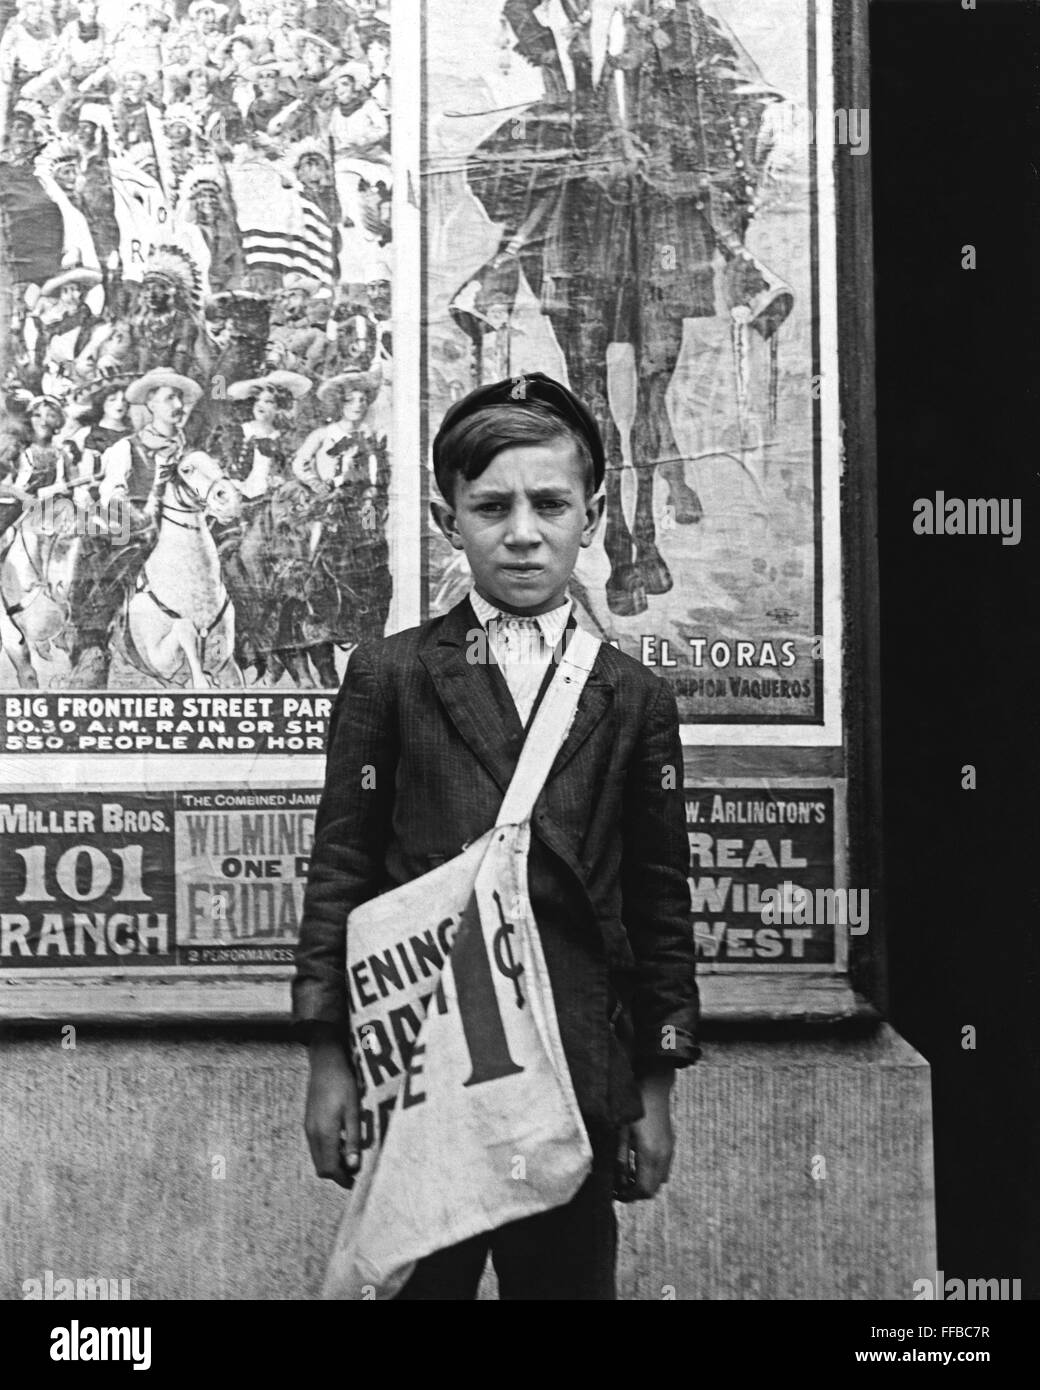 Twelve year old S. Russell is a newsboy in Wilmington,Delaware and has been selling newspapers for two years. His average earnings are 20 cents daily. The boy deposits earnings in du Pont Savings Bank, and on Saturday night works for Reynold's candy shop, delivering packages.  Works 5 hours daily, except Saturday, when he works 11. Circa 1910 . Photograph by Lewis Wickes Hine (1874-1940)    This archival print is available in the following sizes:    8' x 10'   $15.95 w/ FREE SHIPPING  11' x 14' $23.95 w/ FREE SHIPPING  16' x 20' $59.95 w/ FREE SHIPPING  20' x 24' $99.95 w/ FREE SHIPPING    * T Stock Photo